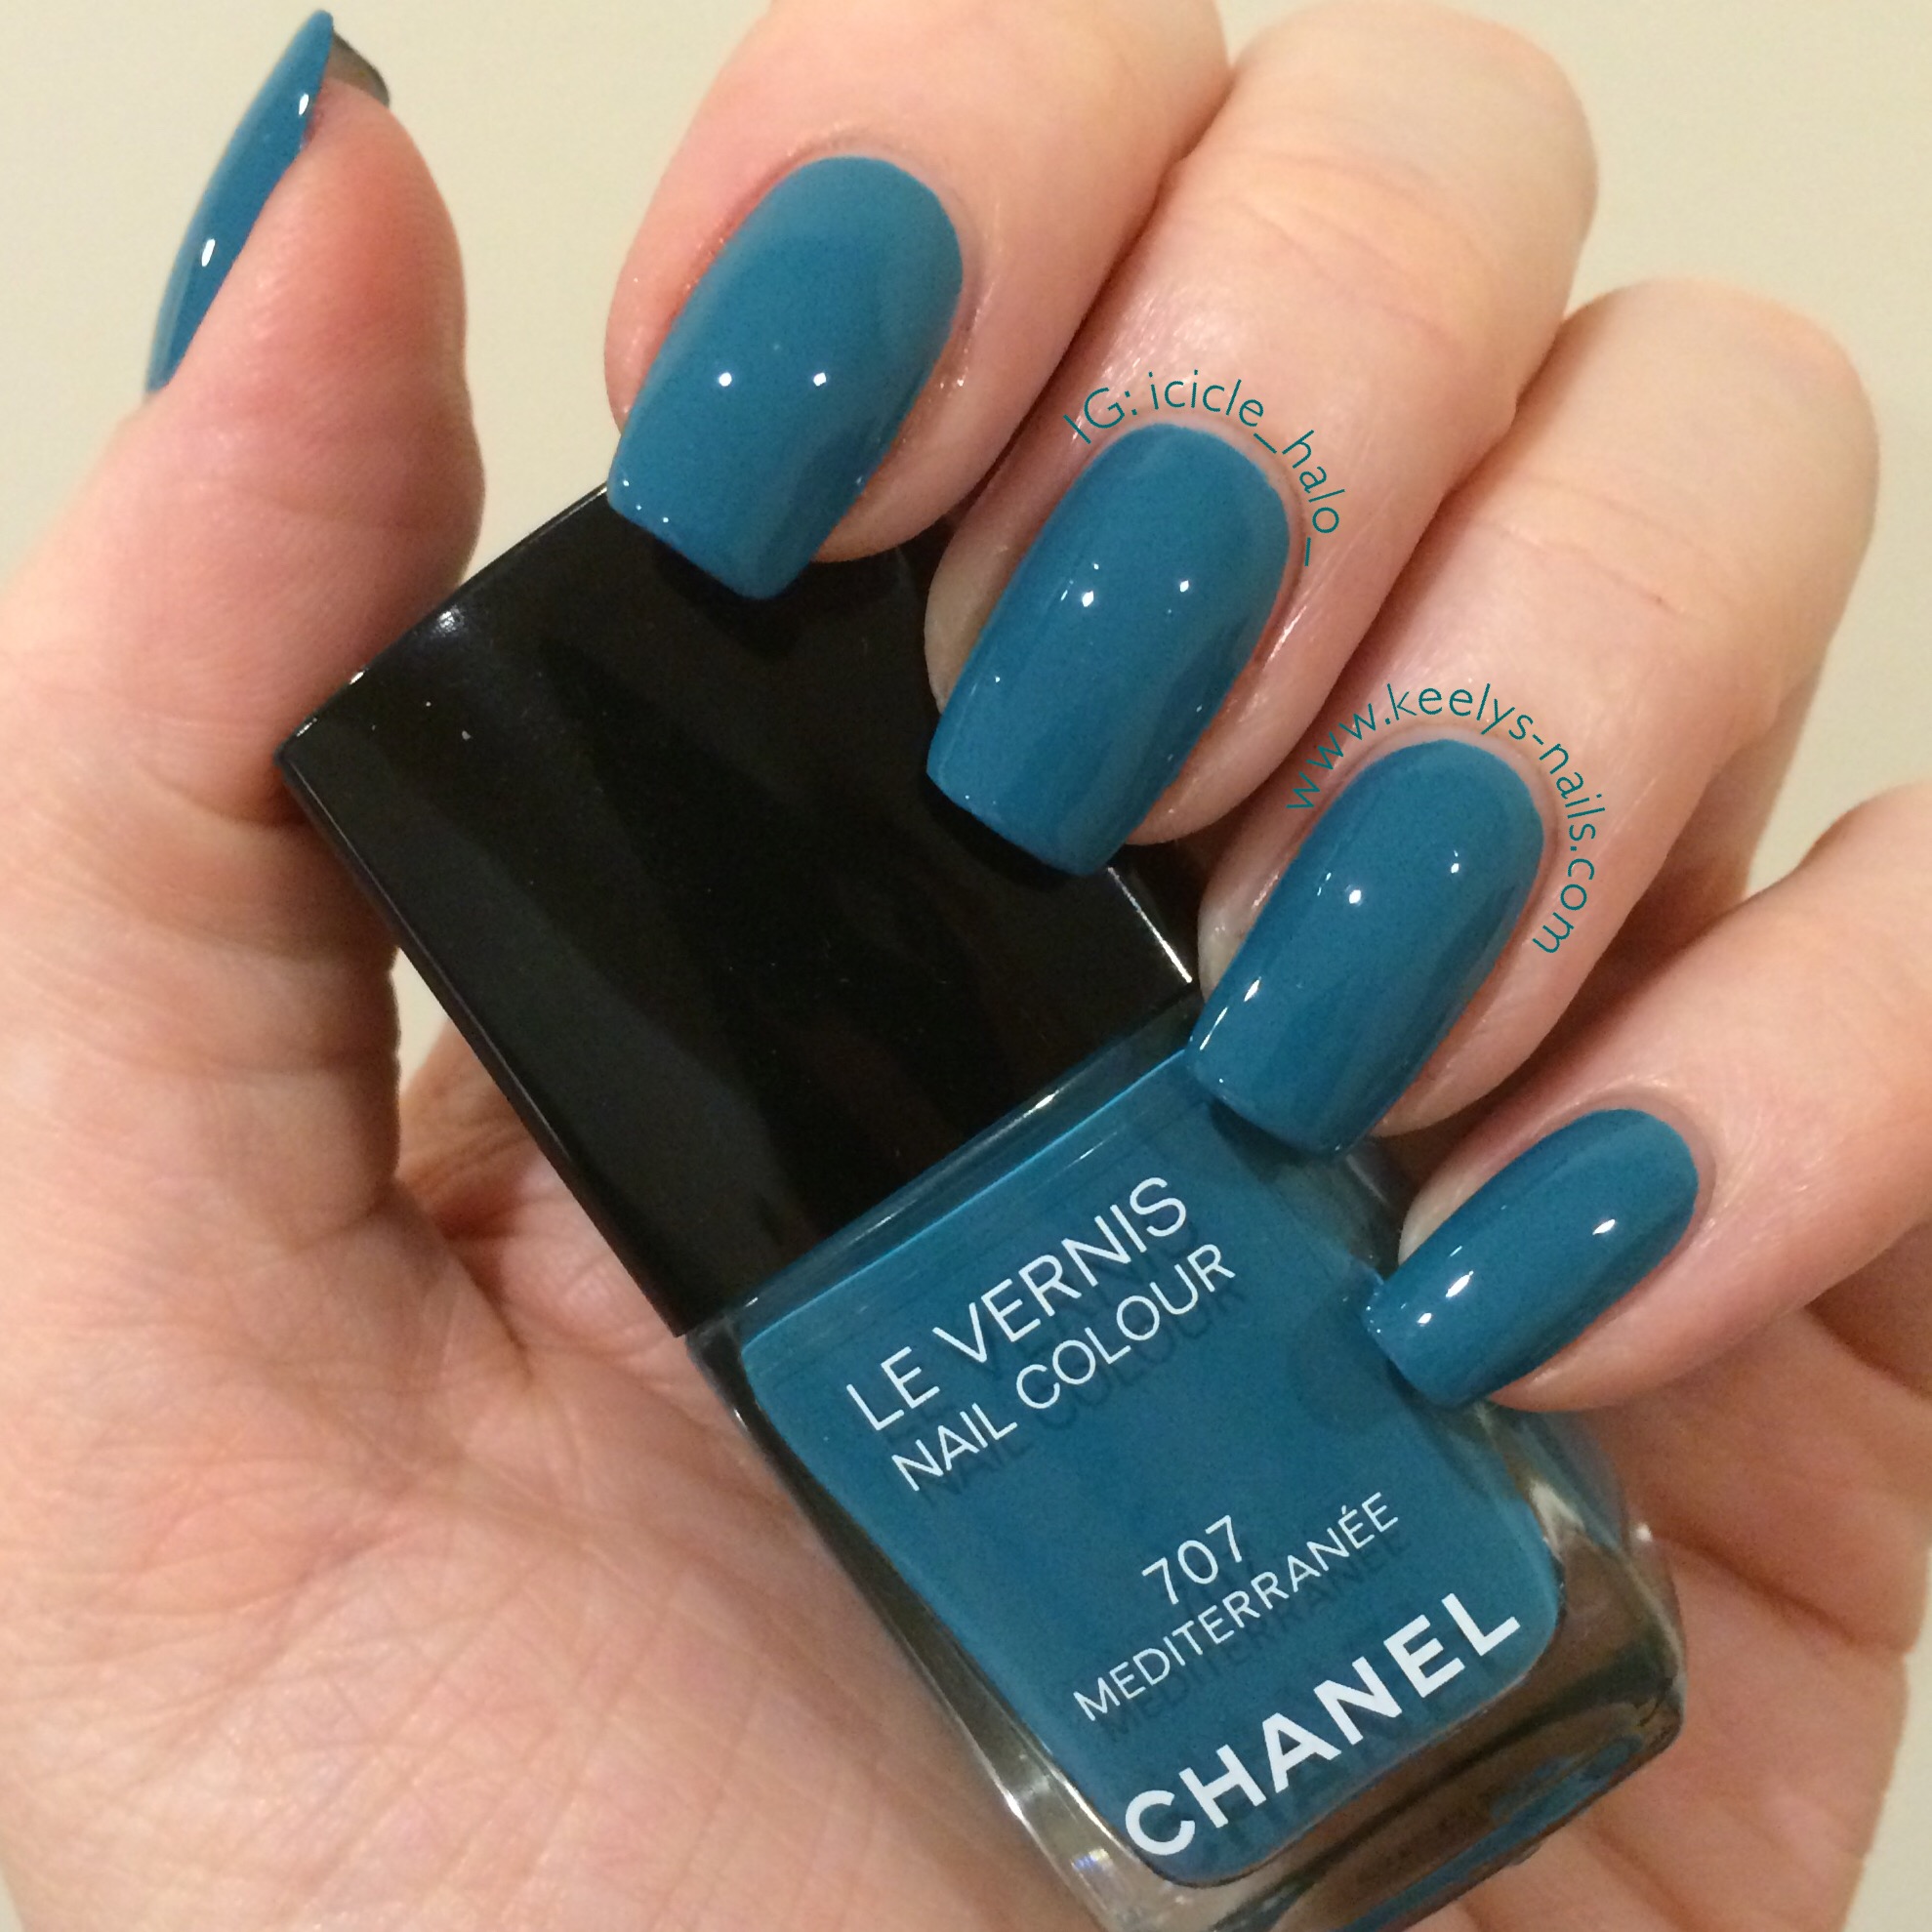 A saturated turquoise from Chanel in my stash - this is inspired by the Mediterranean sea